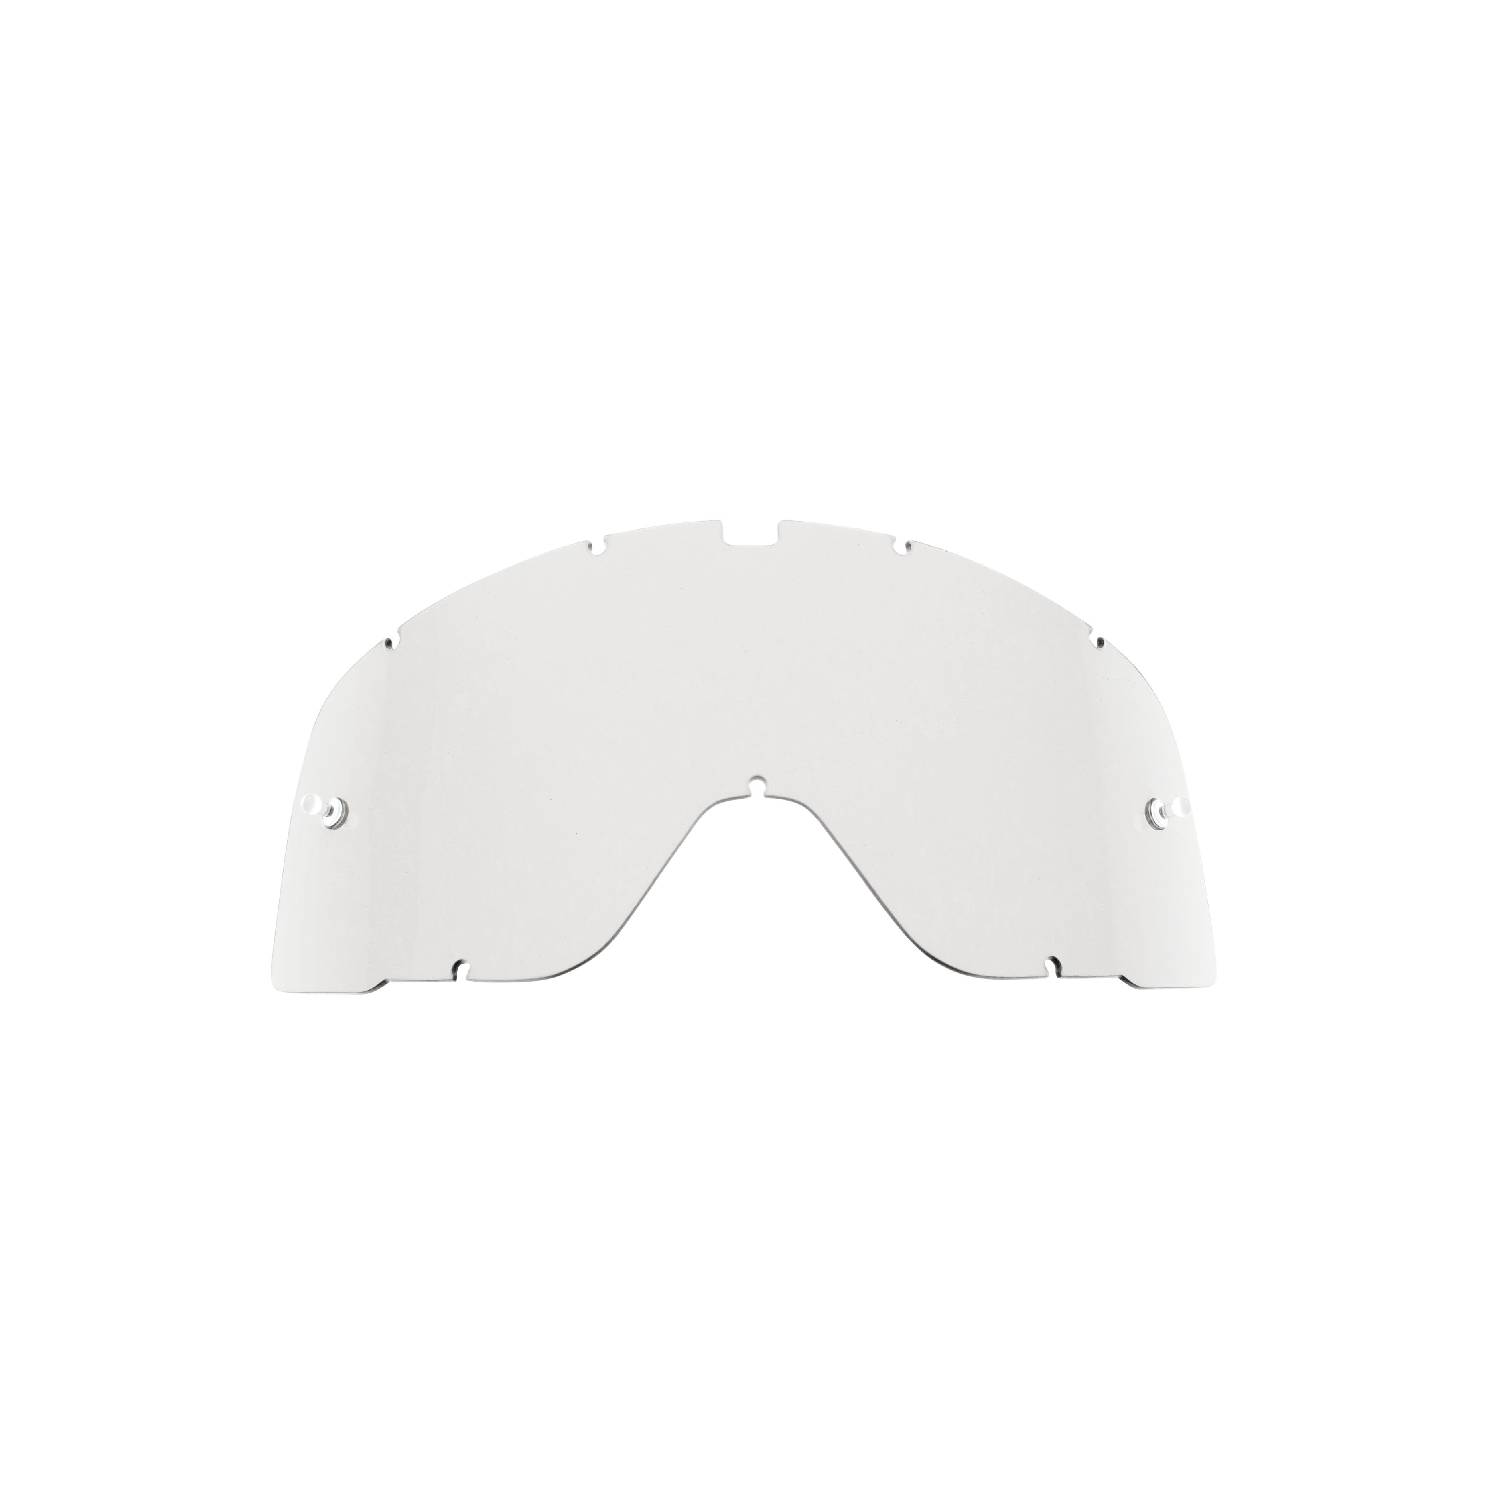 clear replacement lenses for goggles compatible for 100% Barstow / Barstow Curved goggle